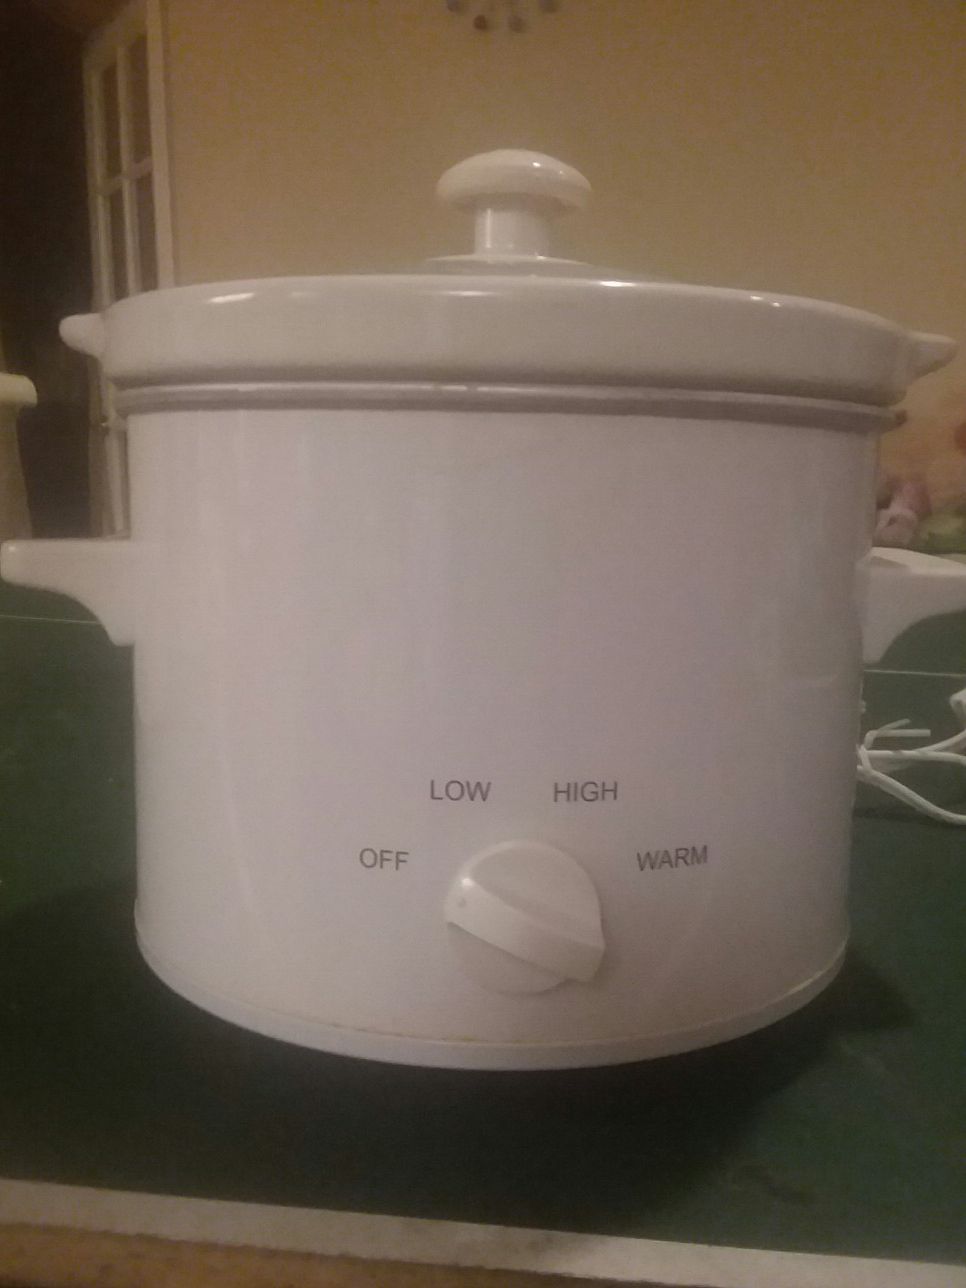 Cuisinart Stainless Steel 8 Cup Rice Cooker $40 Or Best Offer for Sale in  Moreno Valley, CA - OfferUp